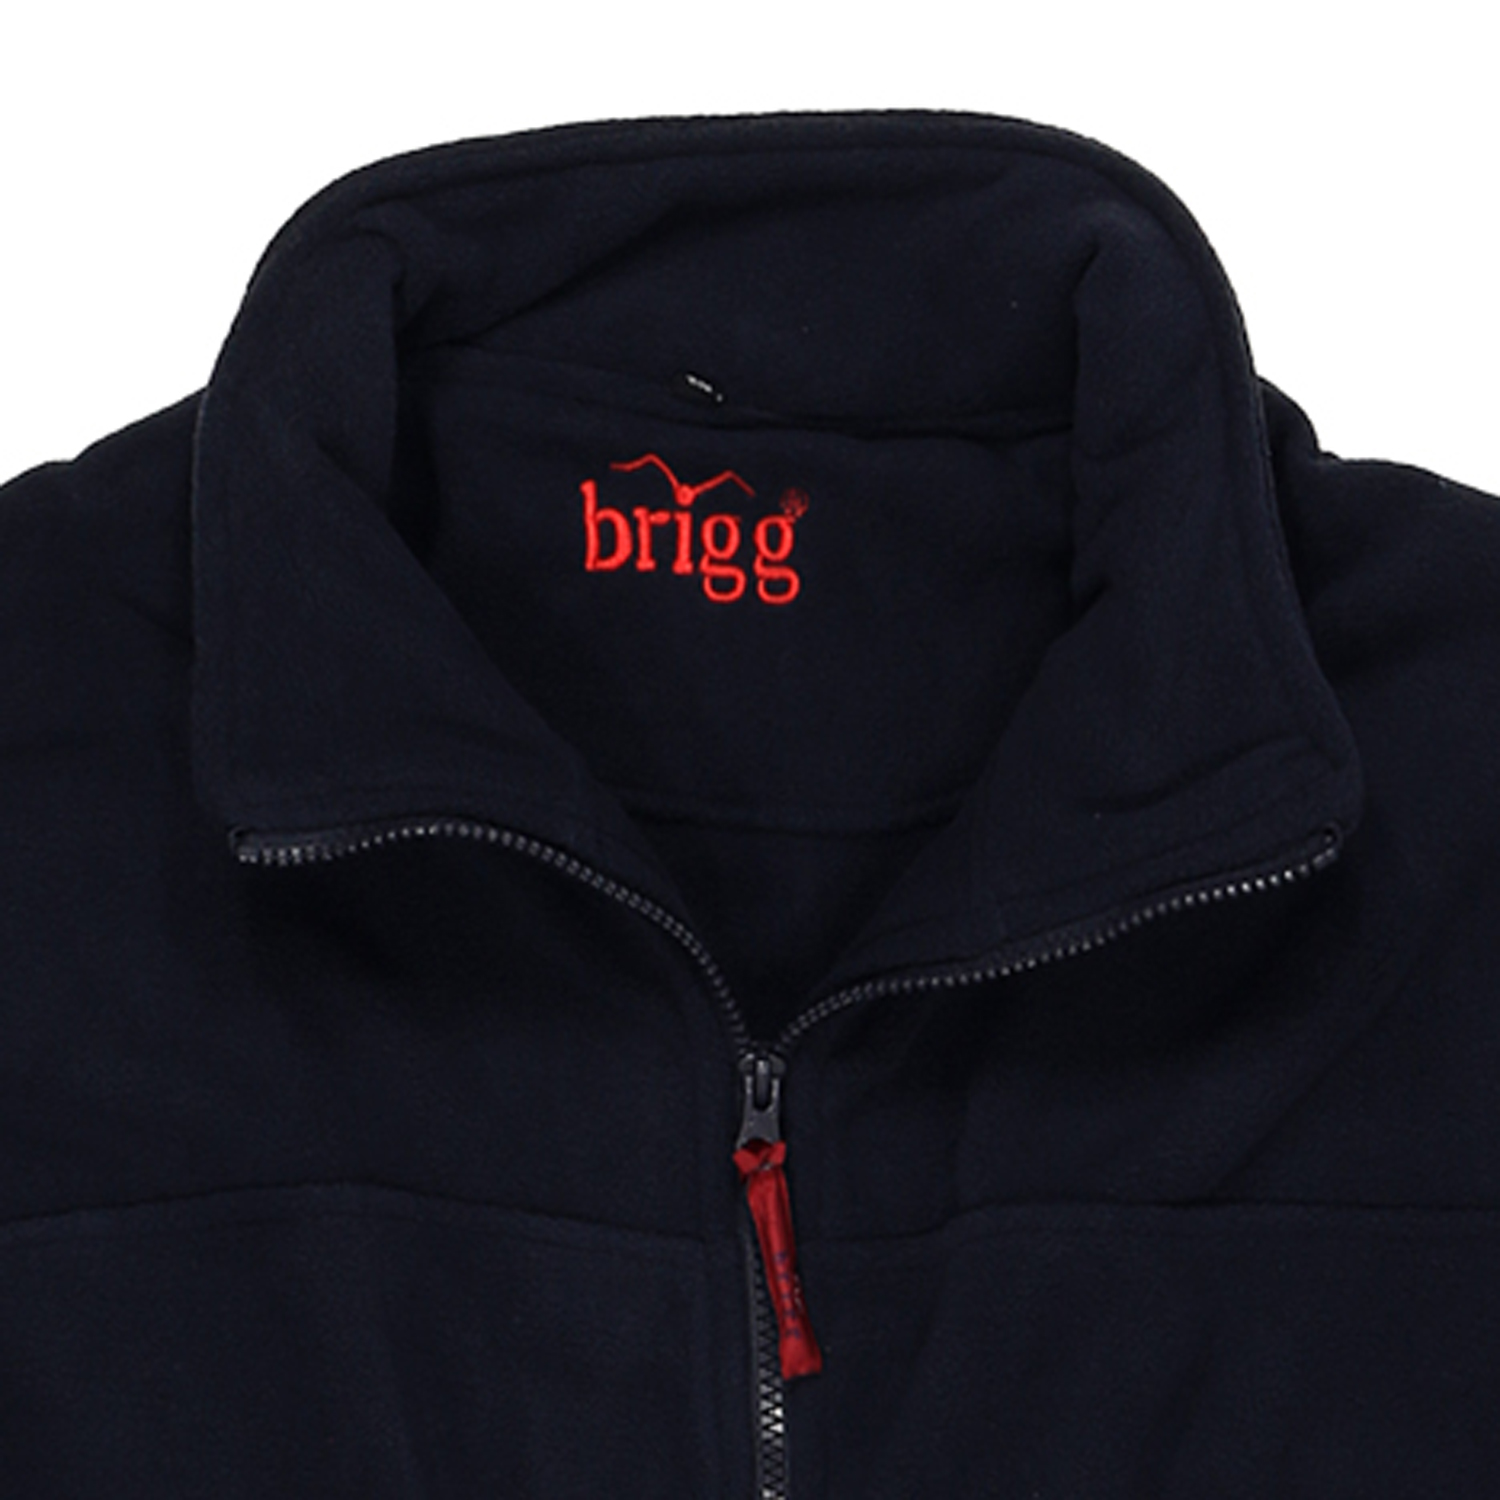 Fleece jacket in navy by Brigg up to oversize 14XL